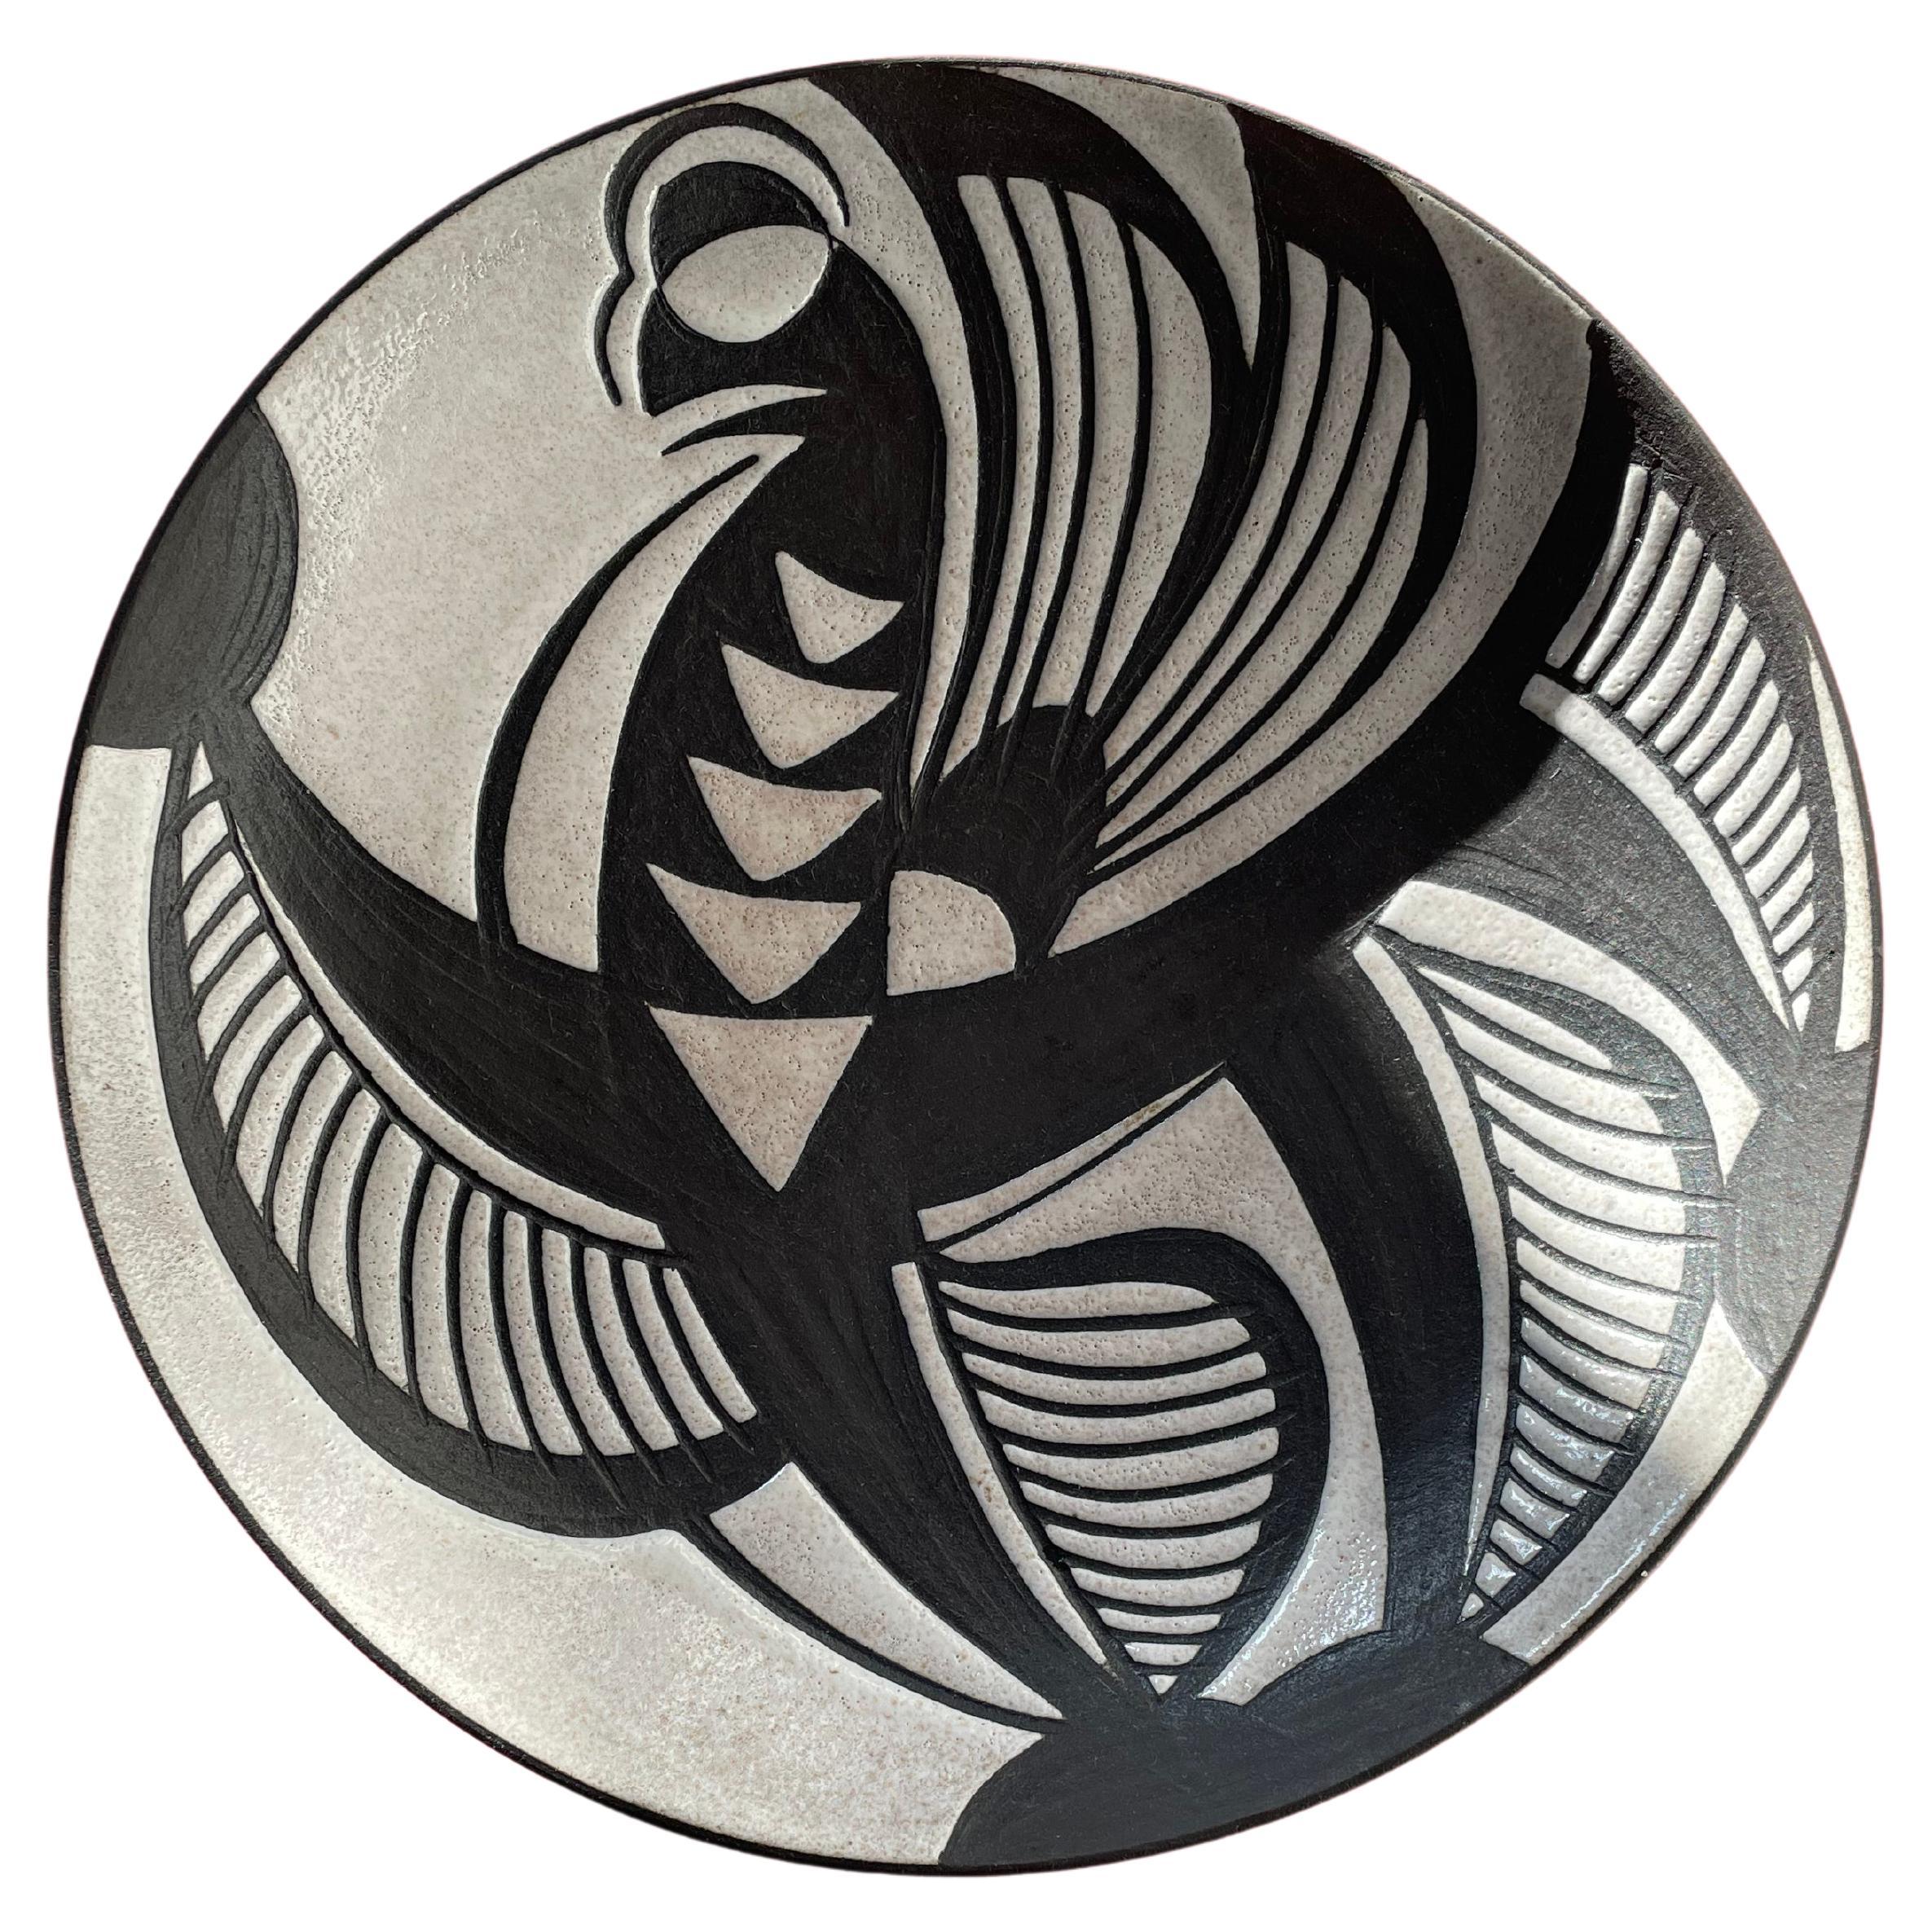 Danish Starck Tribal Large Ceramic Hand-carved Black and White Plate, 1950s